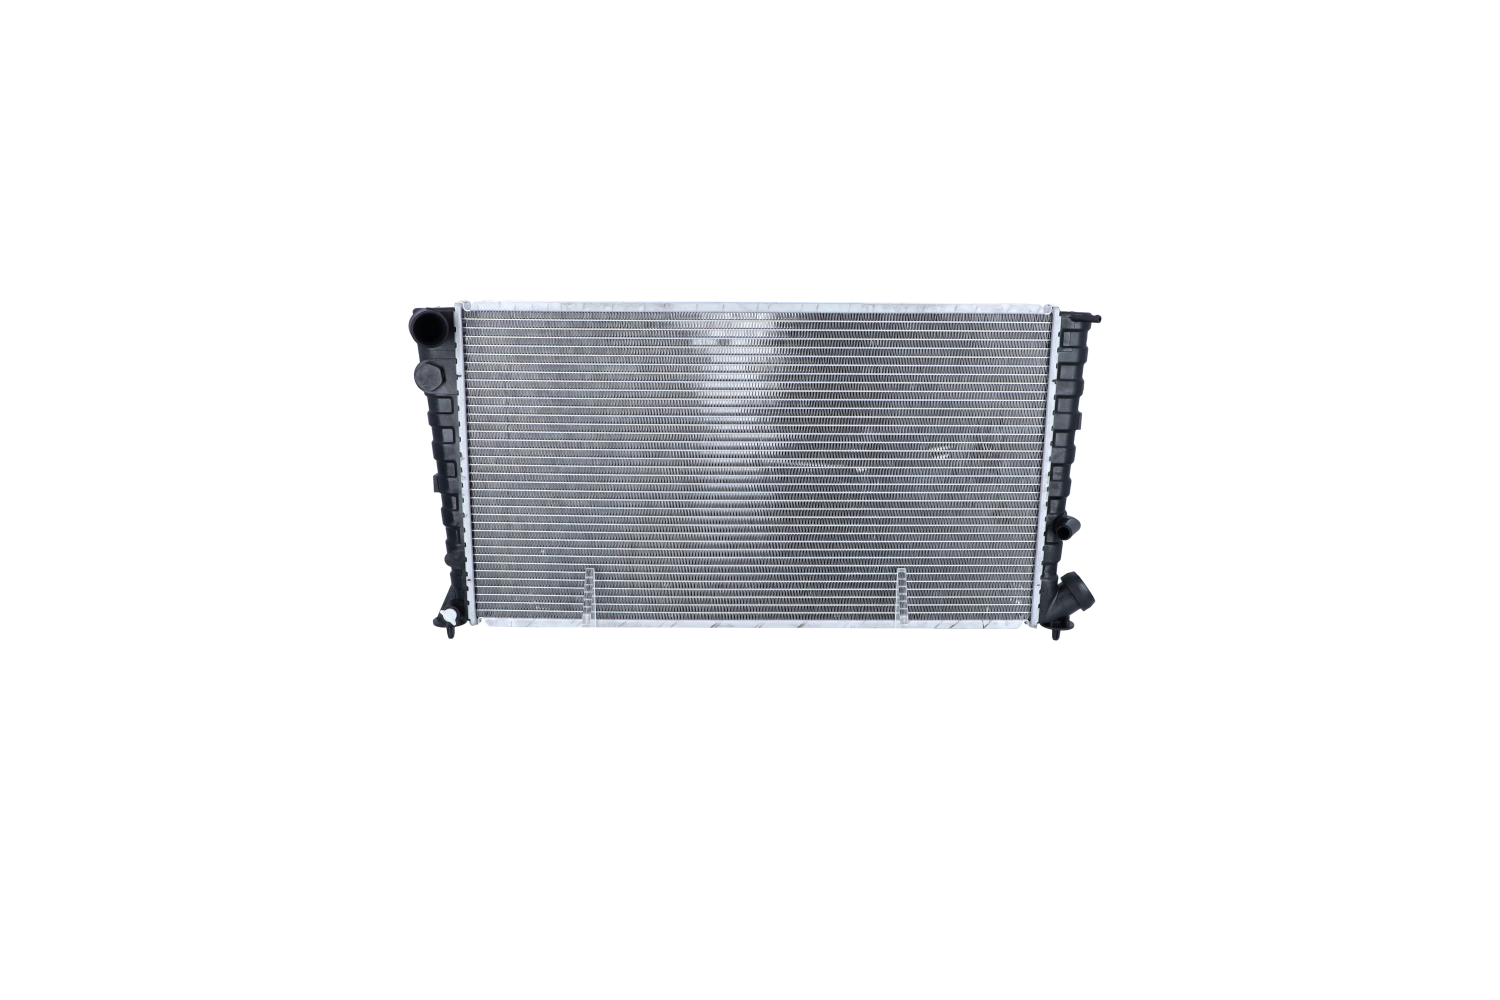 NRF EASY FIT Aluminium, 669 x 366 x 34 mm, with mounting parts, Brazed cooling fins Radiator 519510 buy